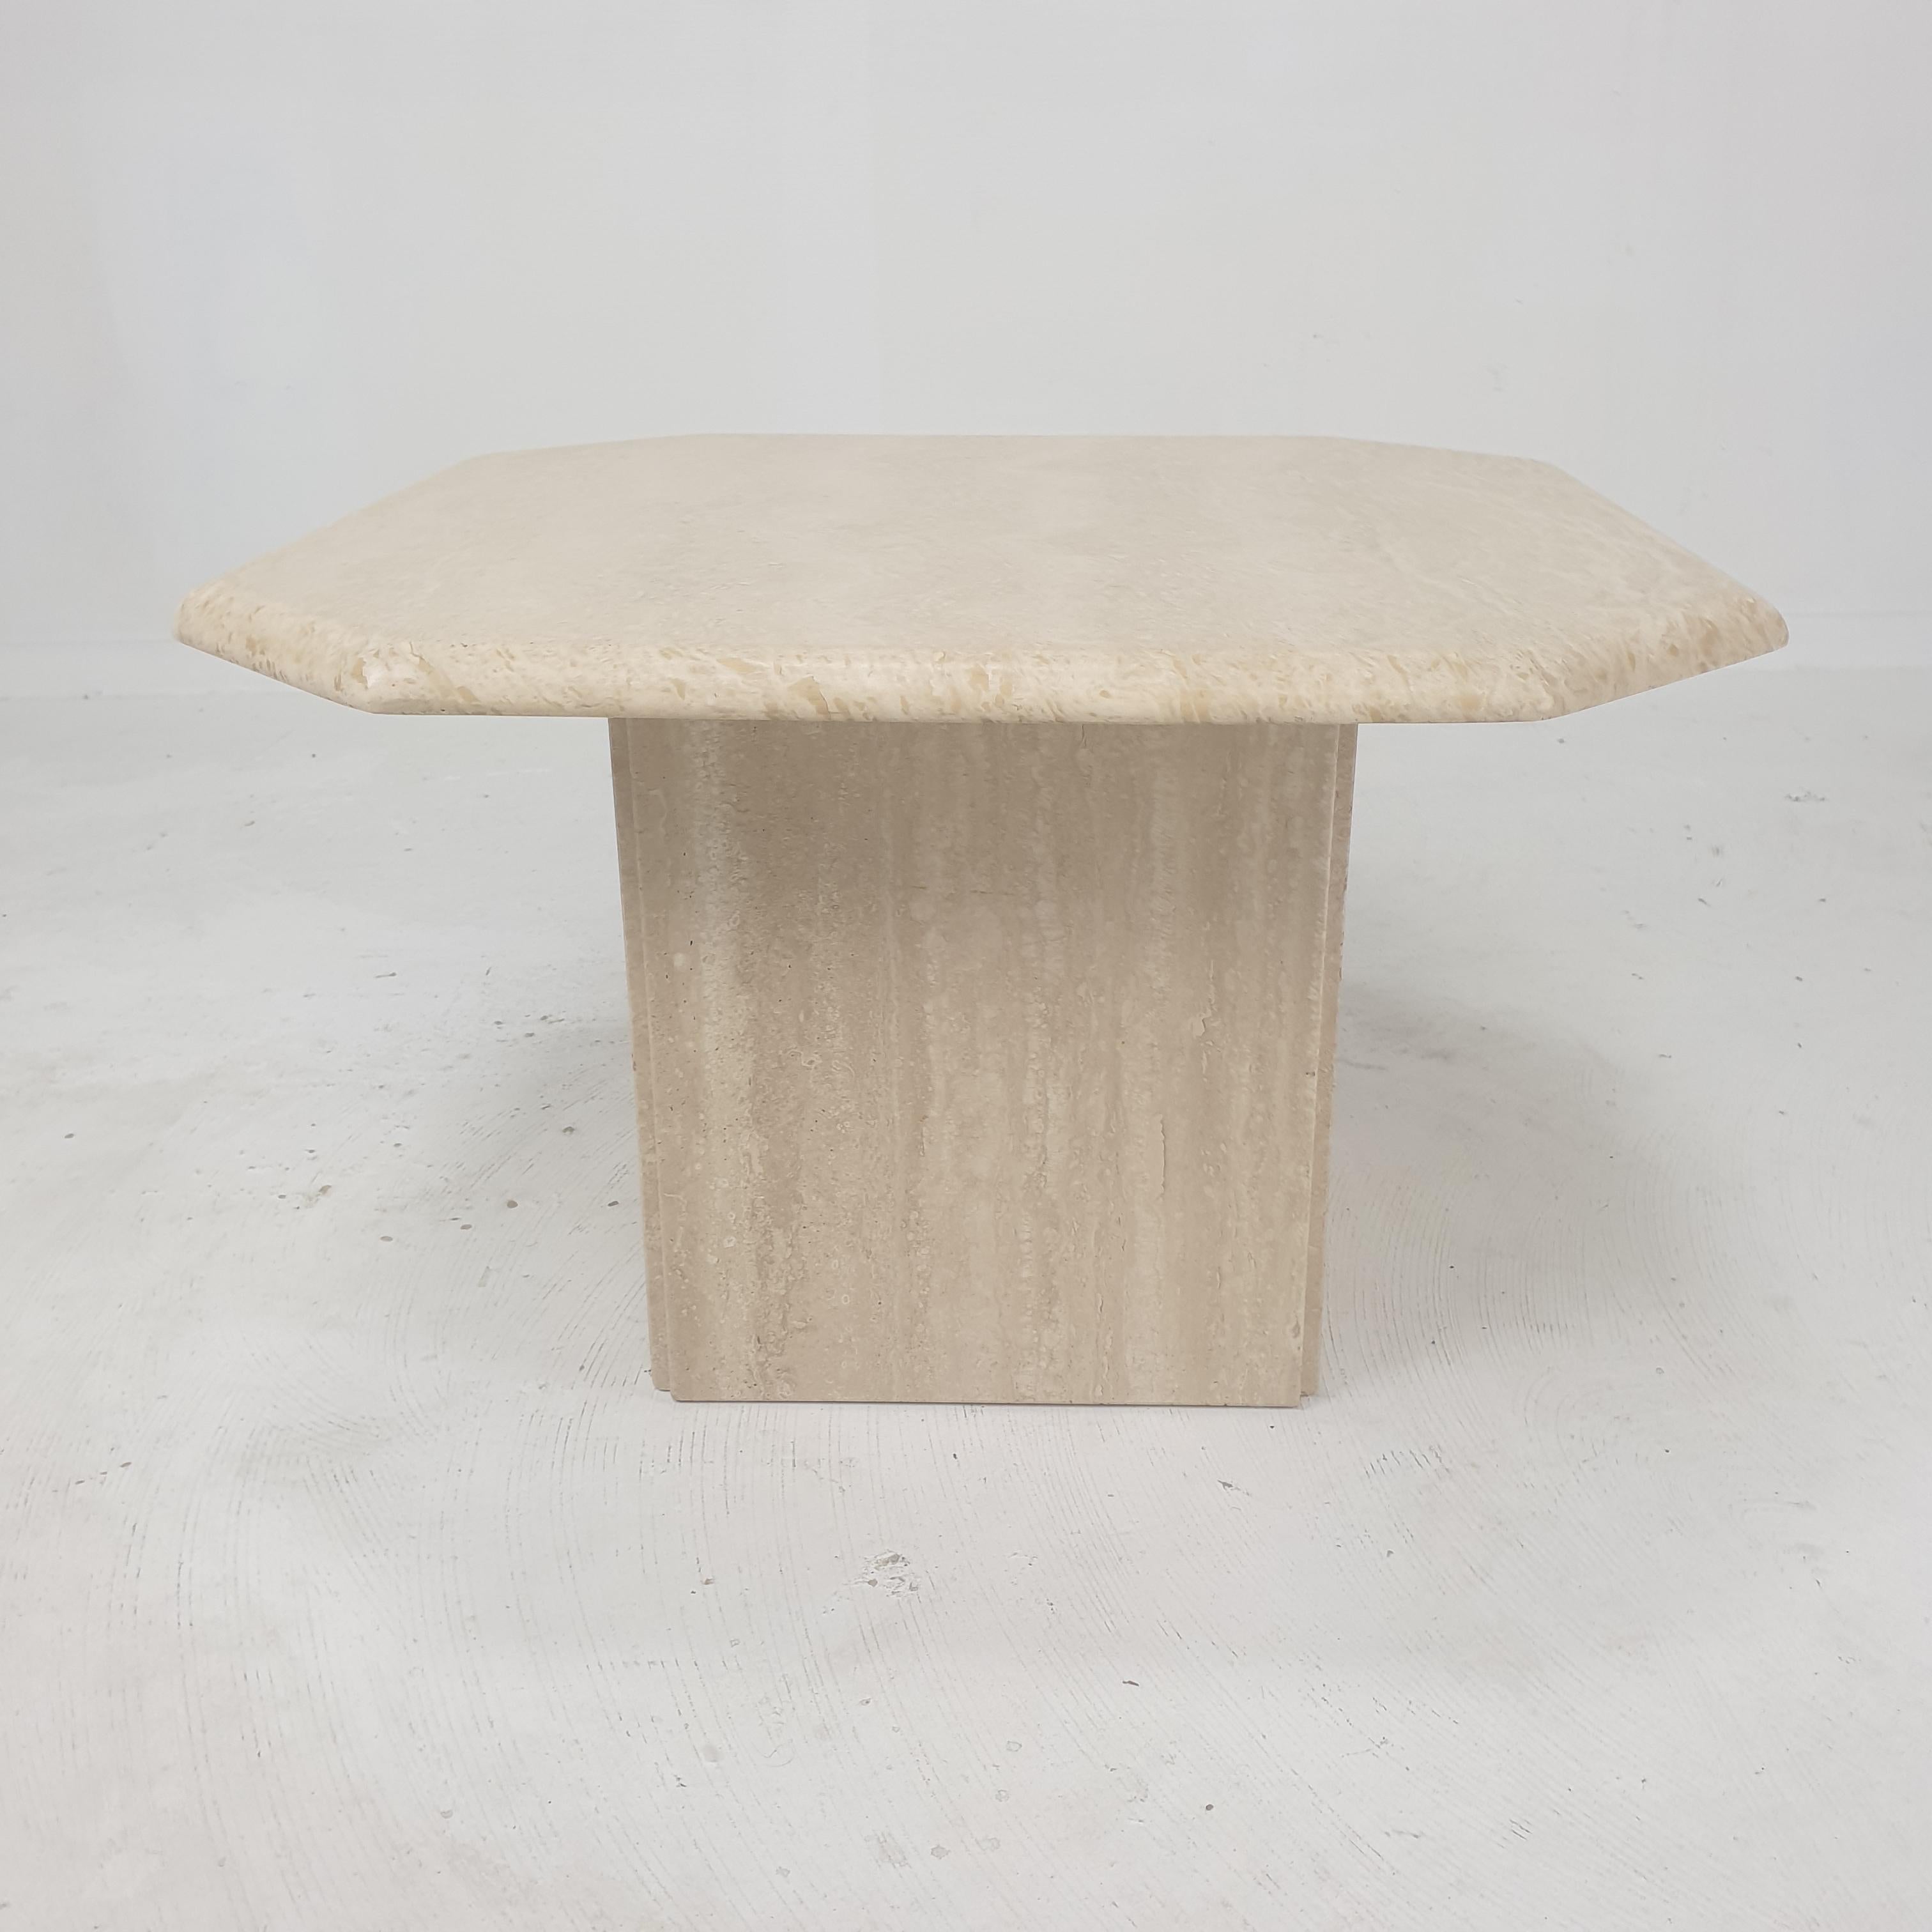 Late 20th Century Italian Travertine Coffee Table, 1980's For Sale